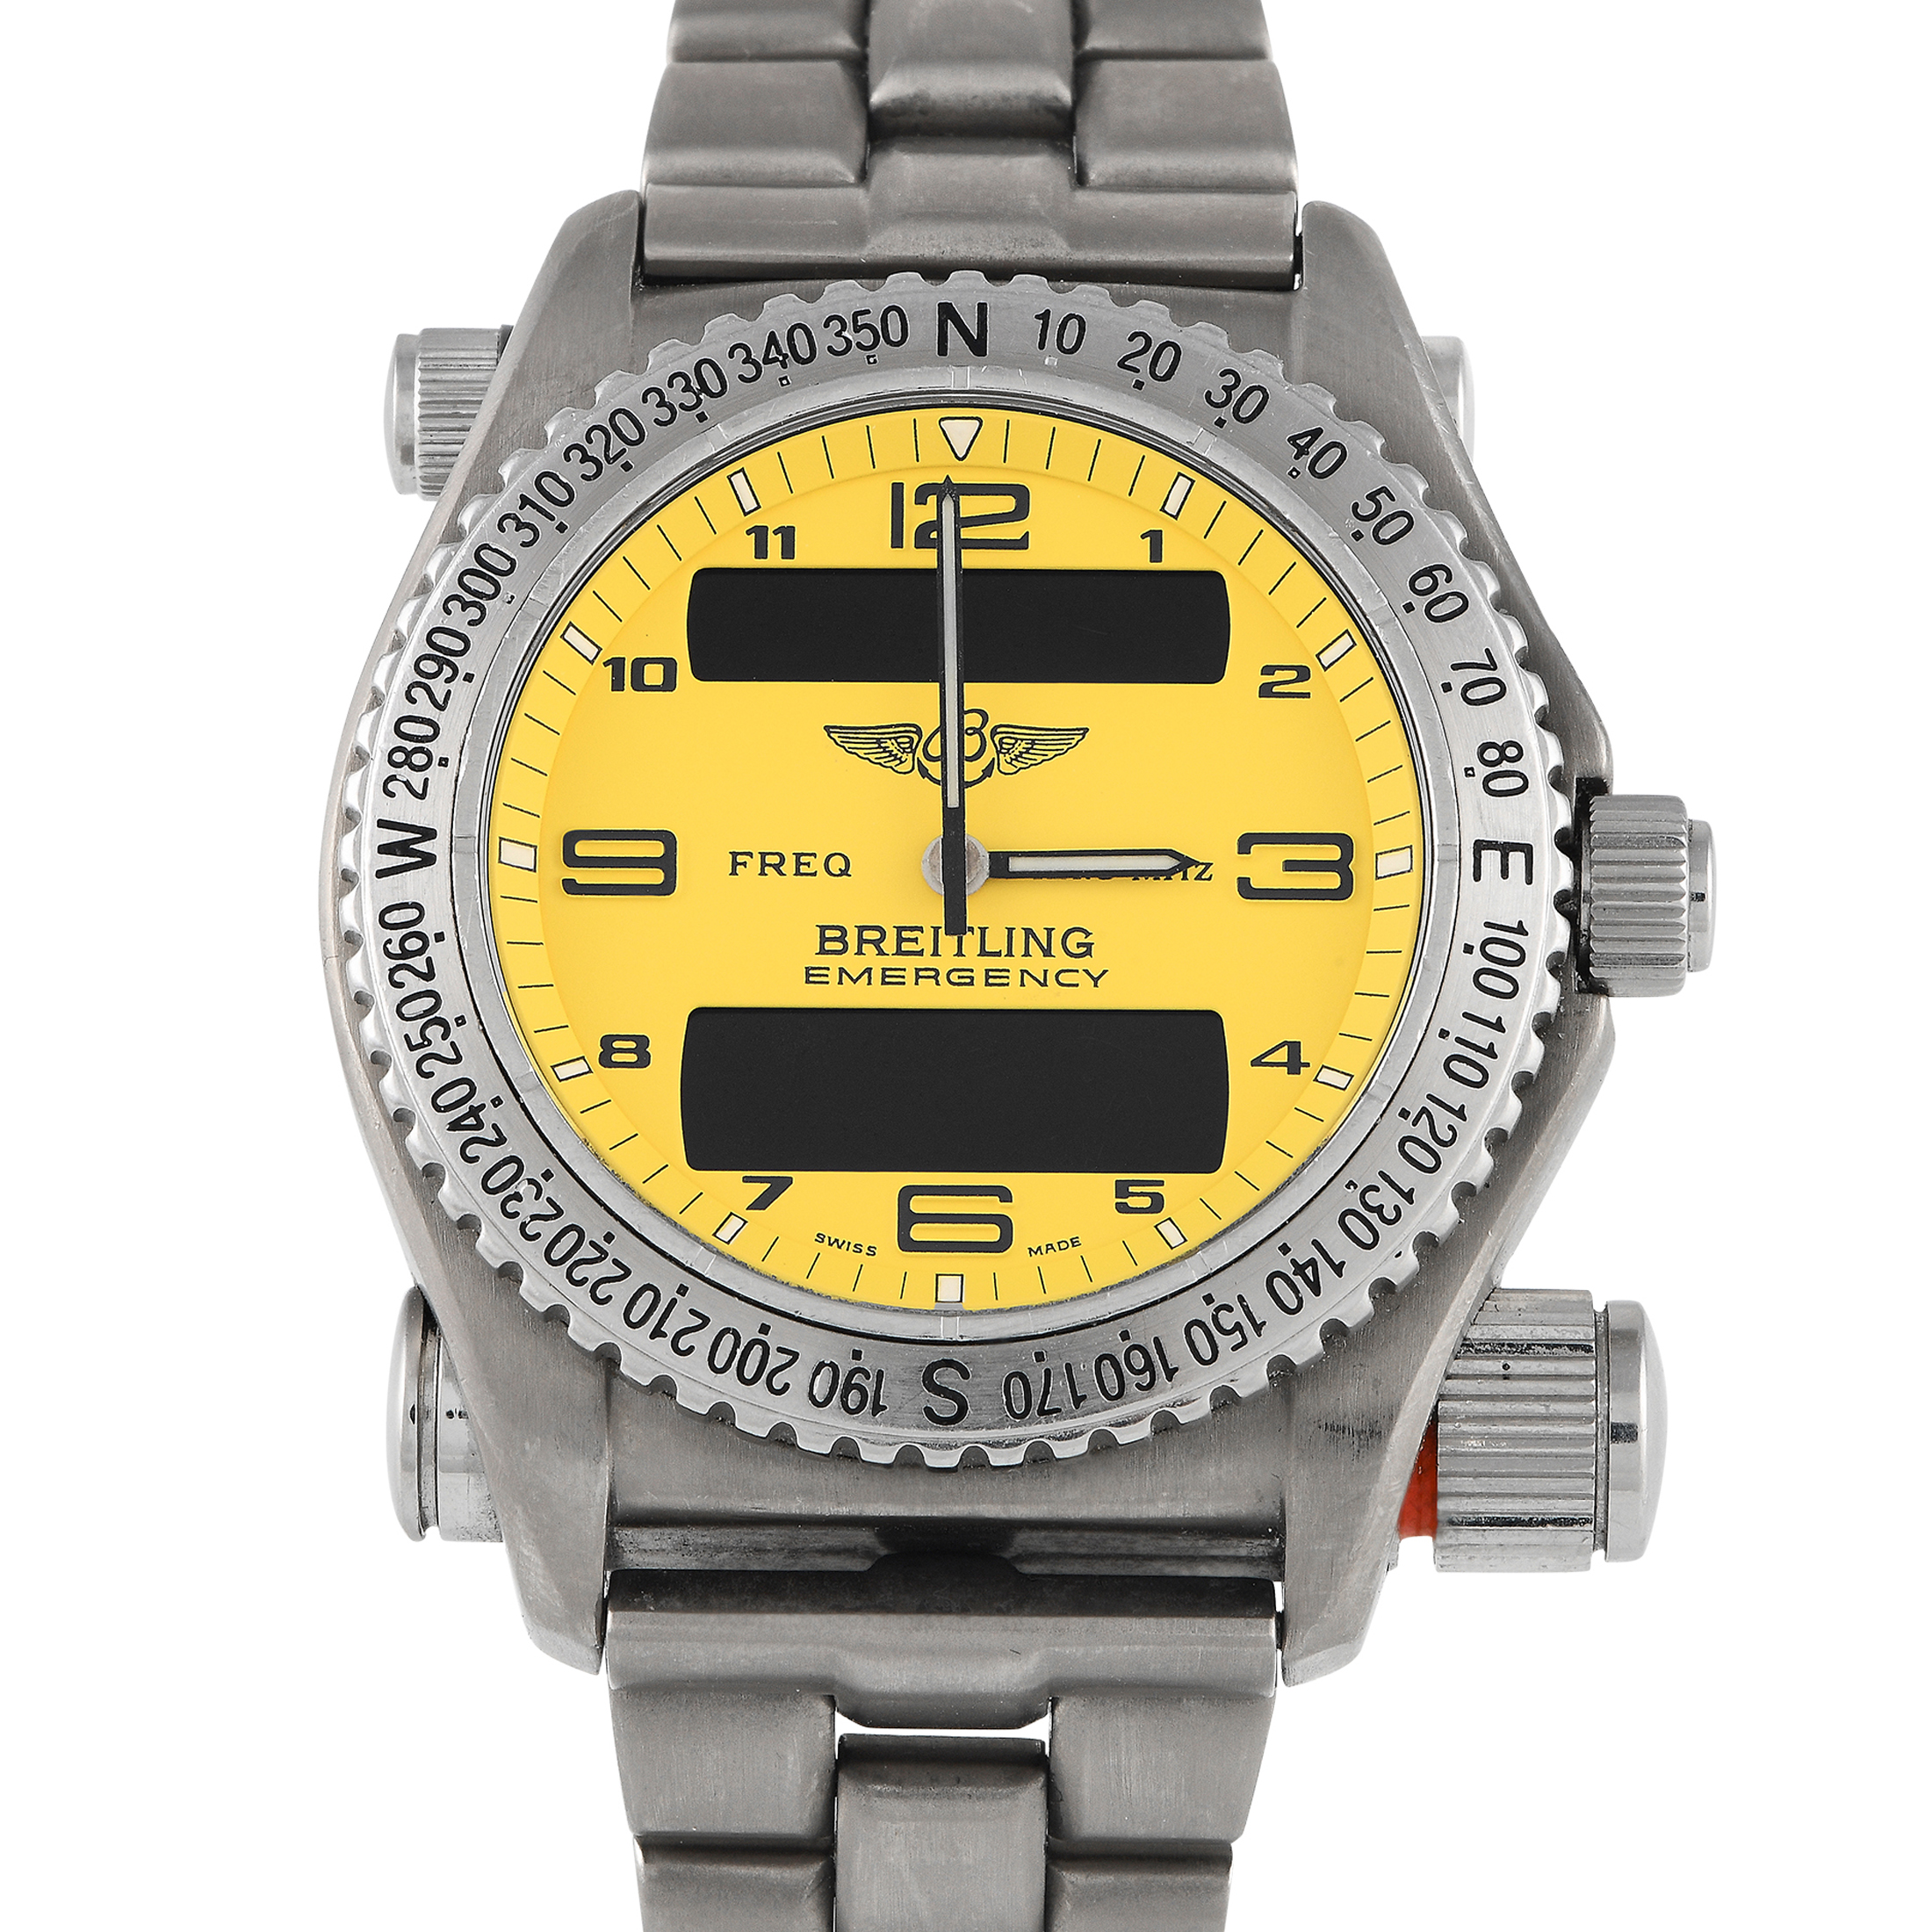 Breitling Emergency Yellow Dial Watch E56121.1